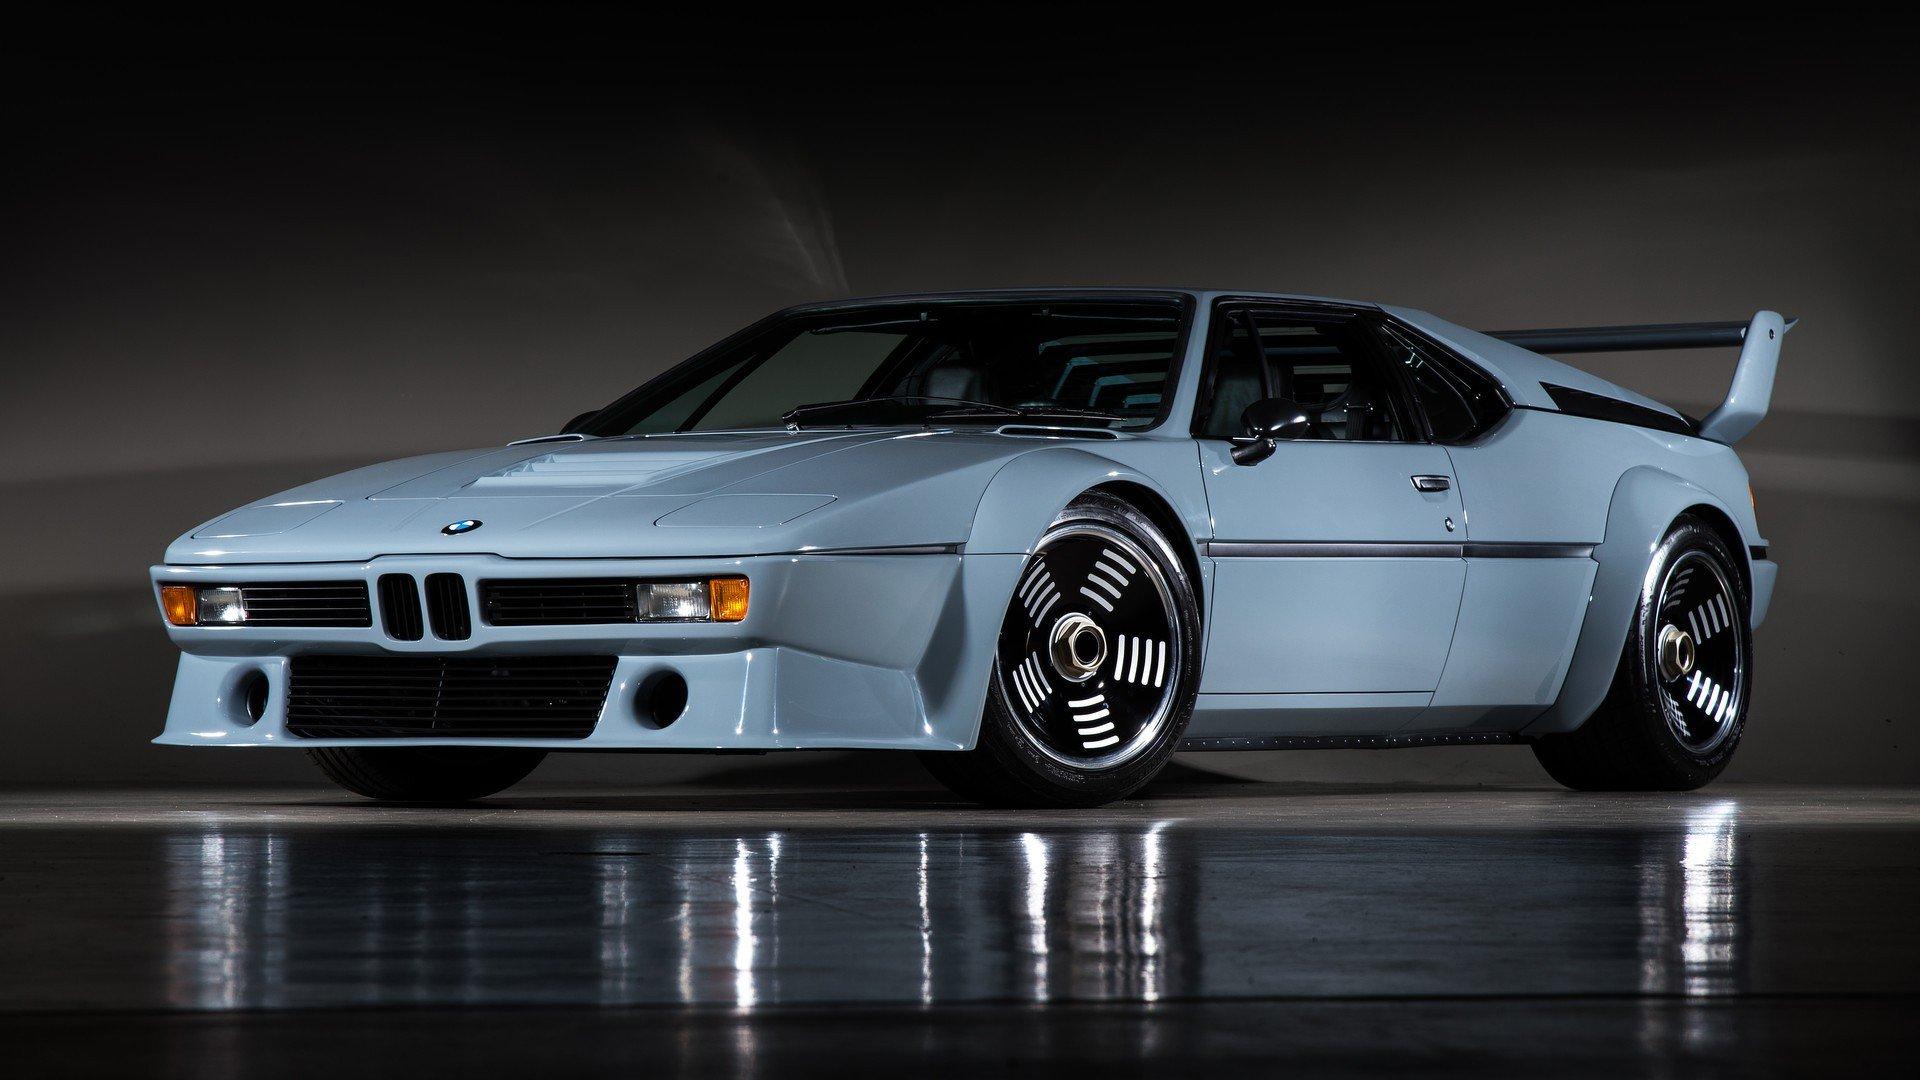 BMW M1 Procar Restored By Canepa Picture, Photo, Wallpaper